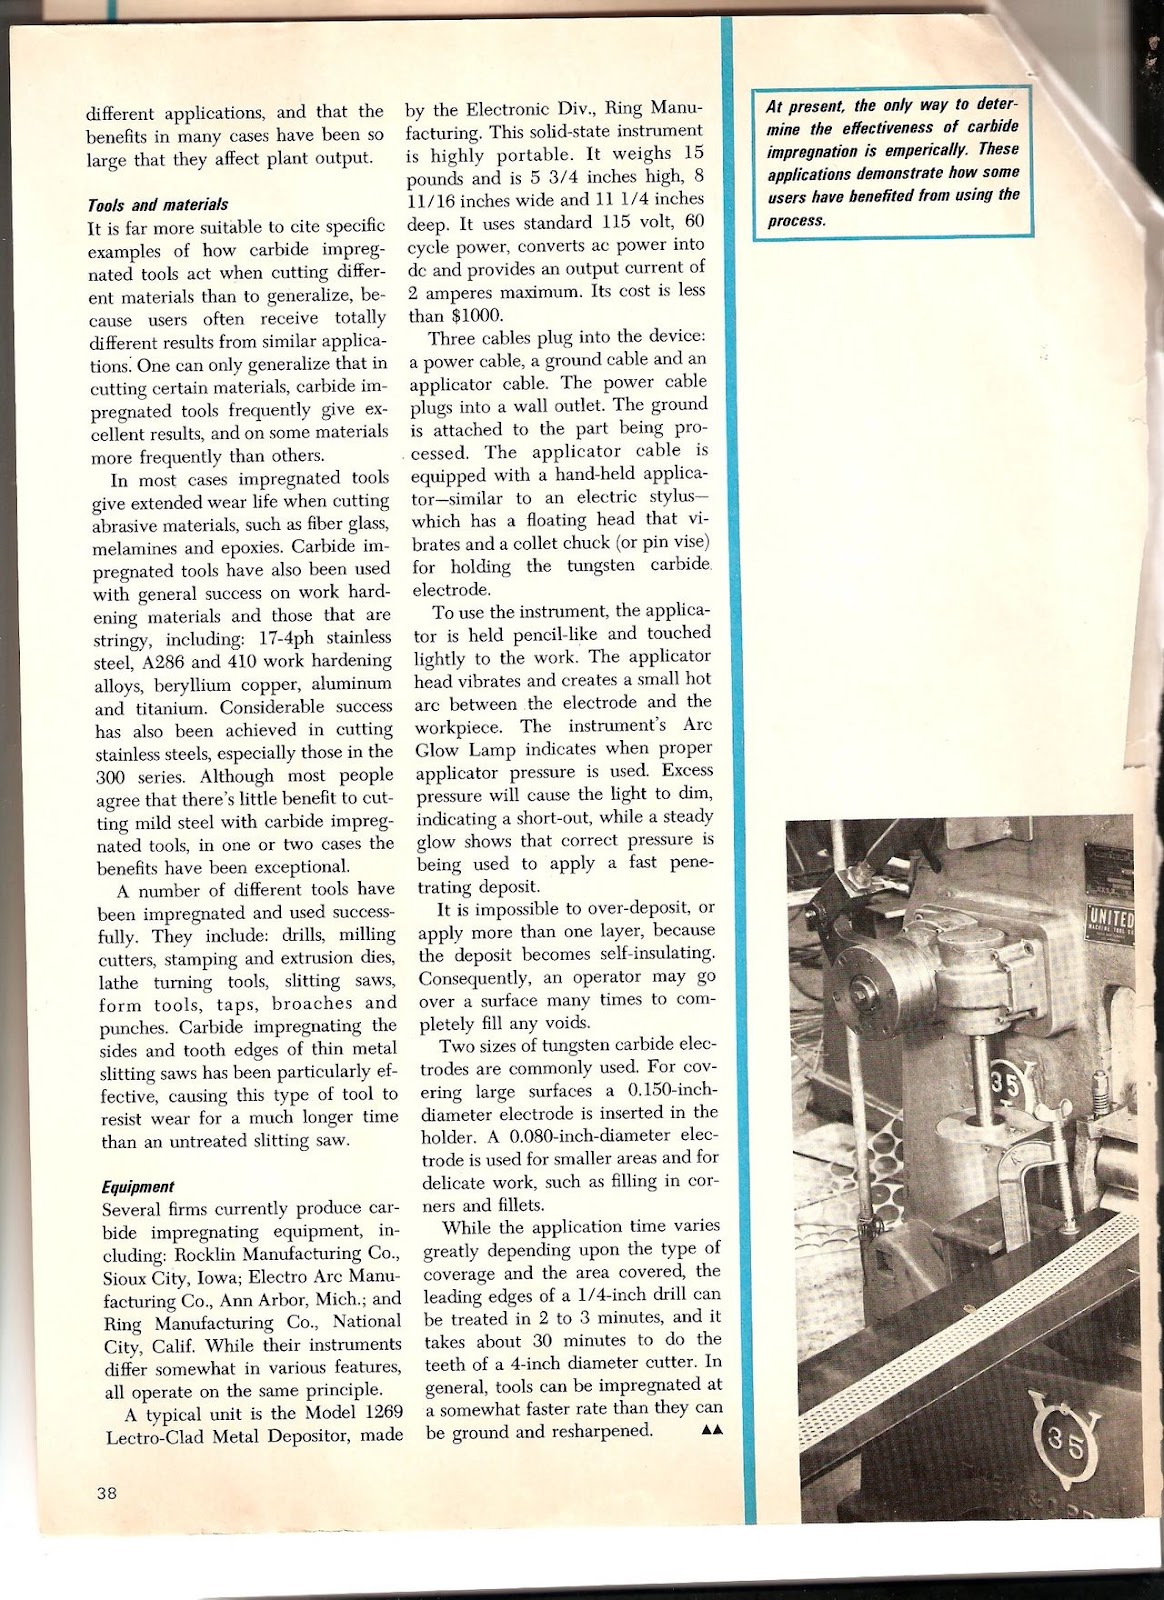 A snippet from the original publication "Carbide Impregnation - The stepchild process with Tremendous Potential"